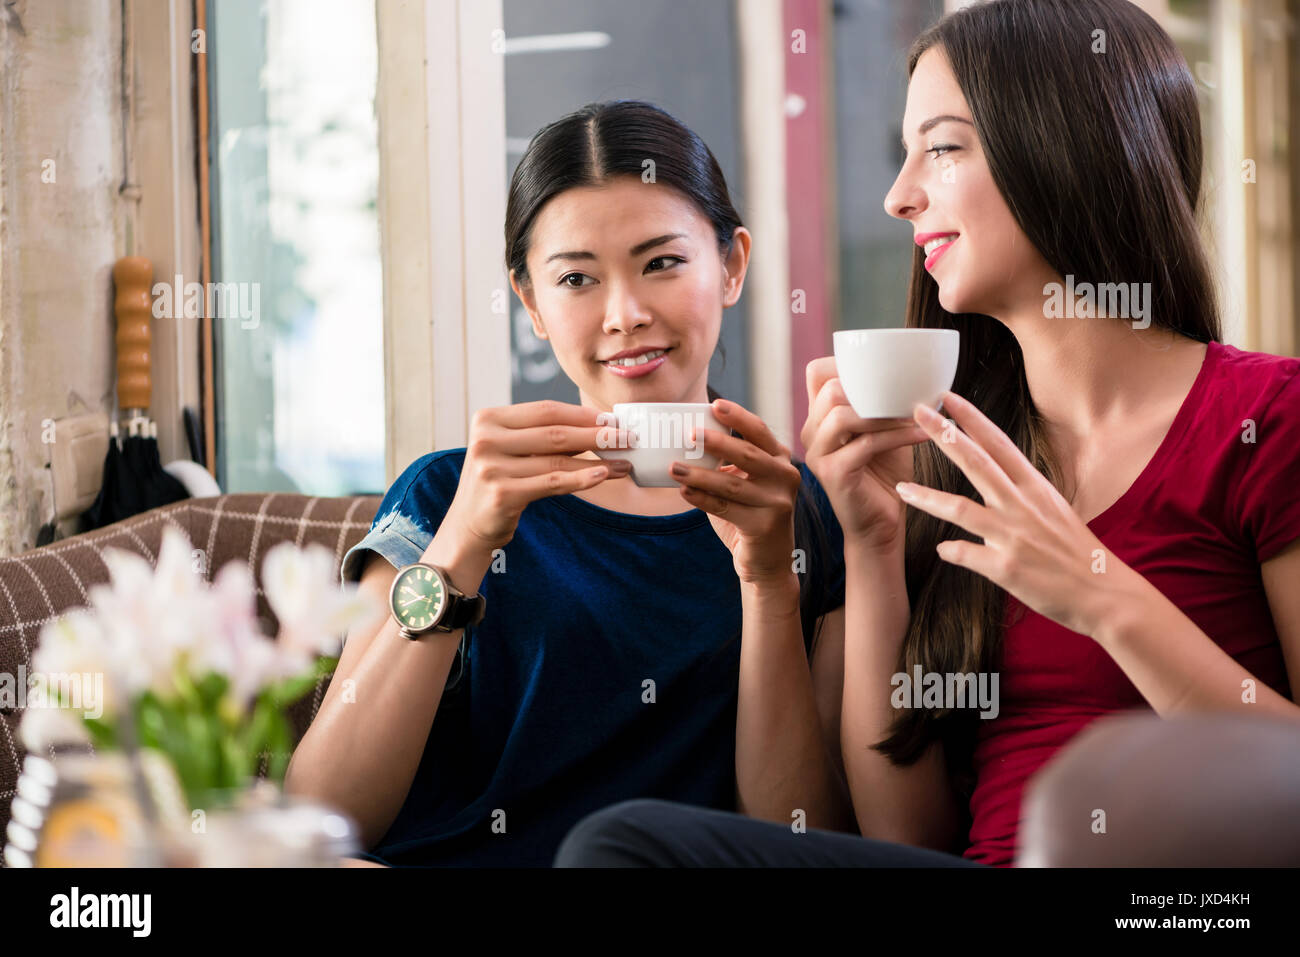 Young woman daydreaming while drinking a cup of coffee Stock Photo